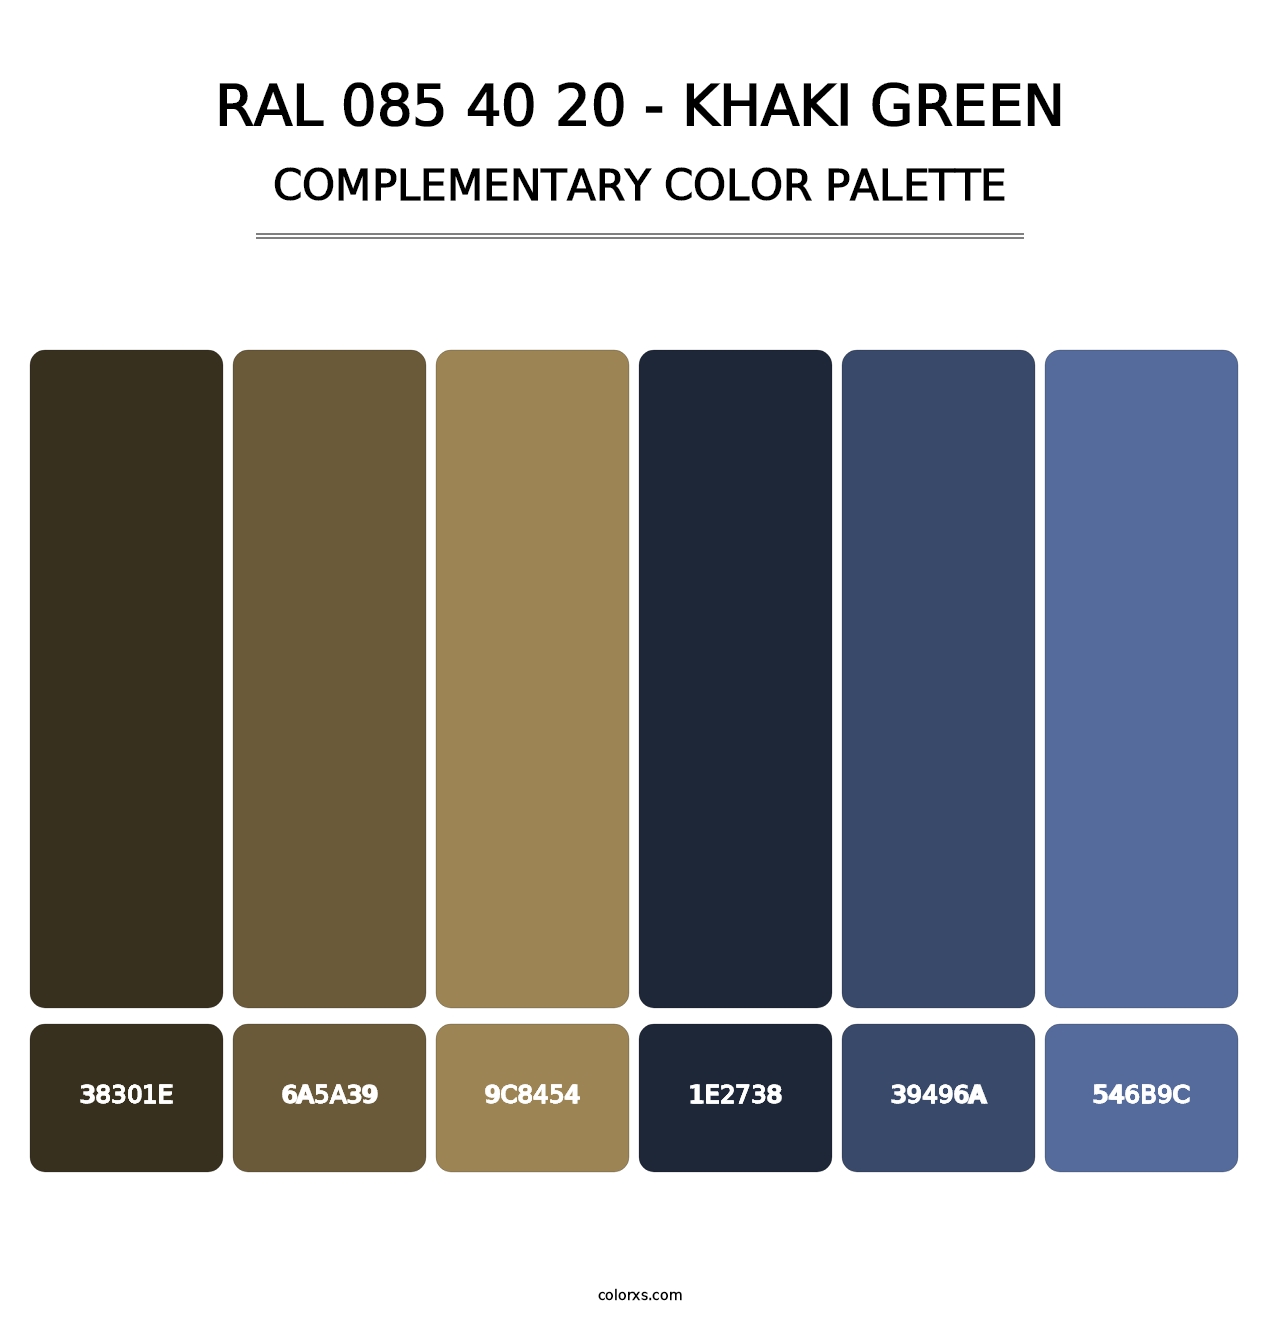 RAL 085 40 20 - Khaki Green - Complementary Color Palette